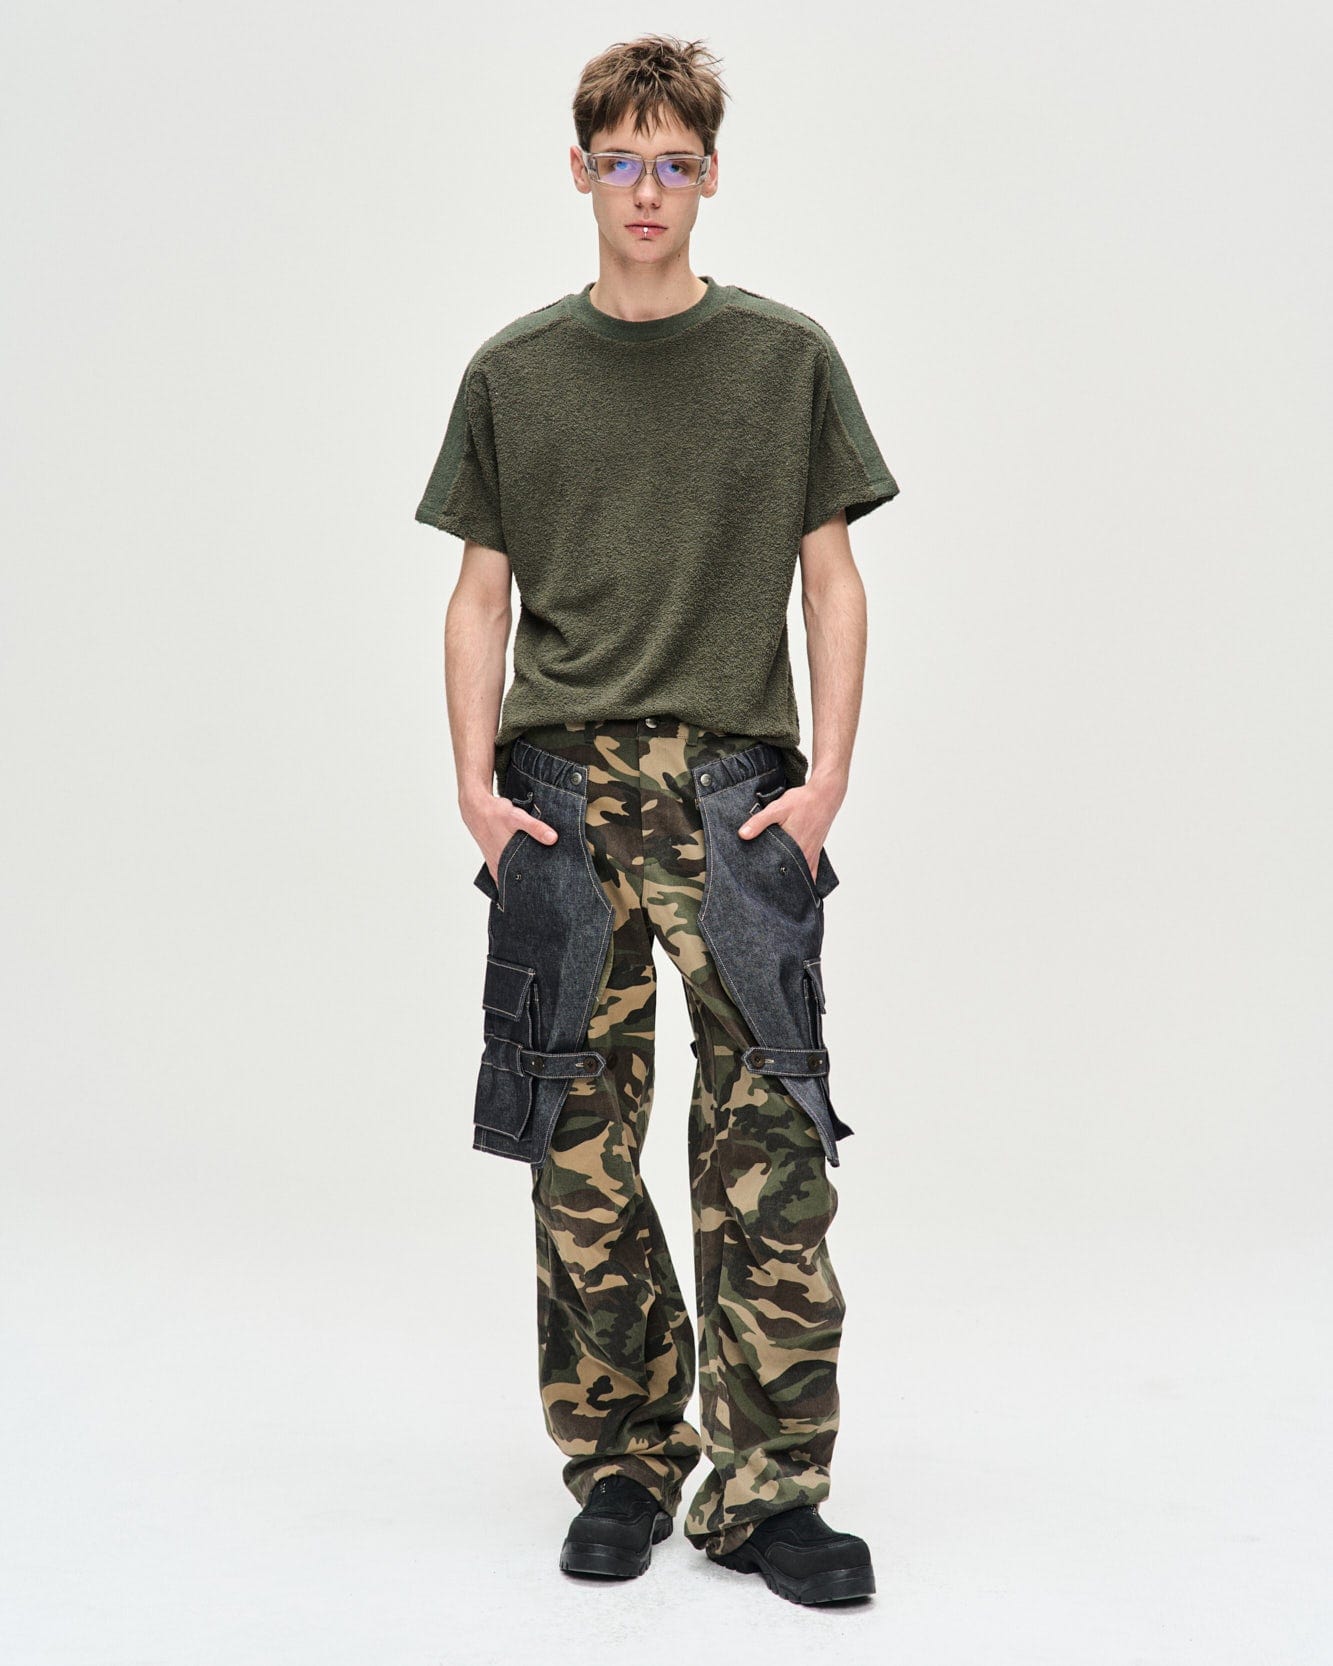 RAPTOR MILITARY STYLE WOMENS CARGO PANTS IN GREEN